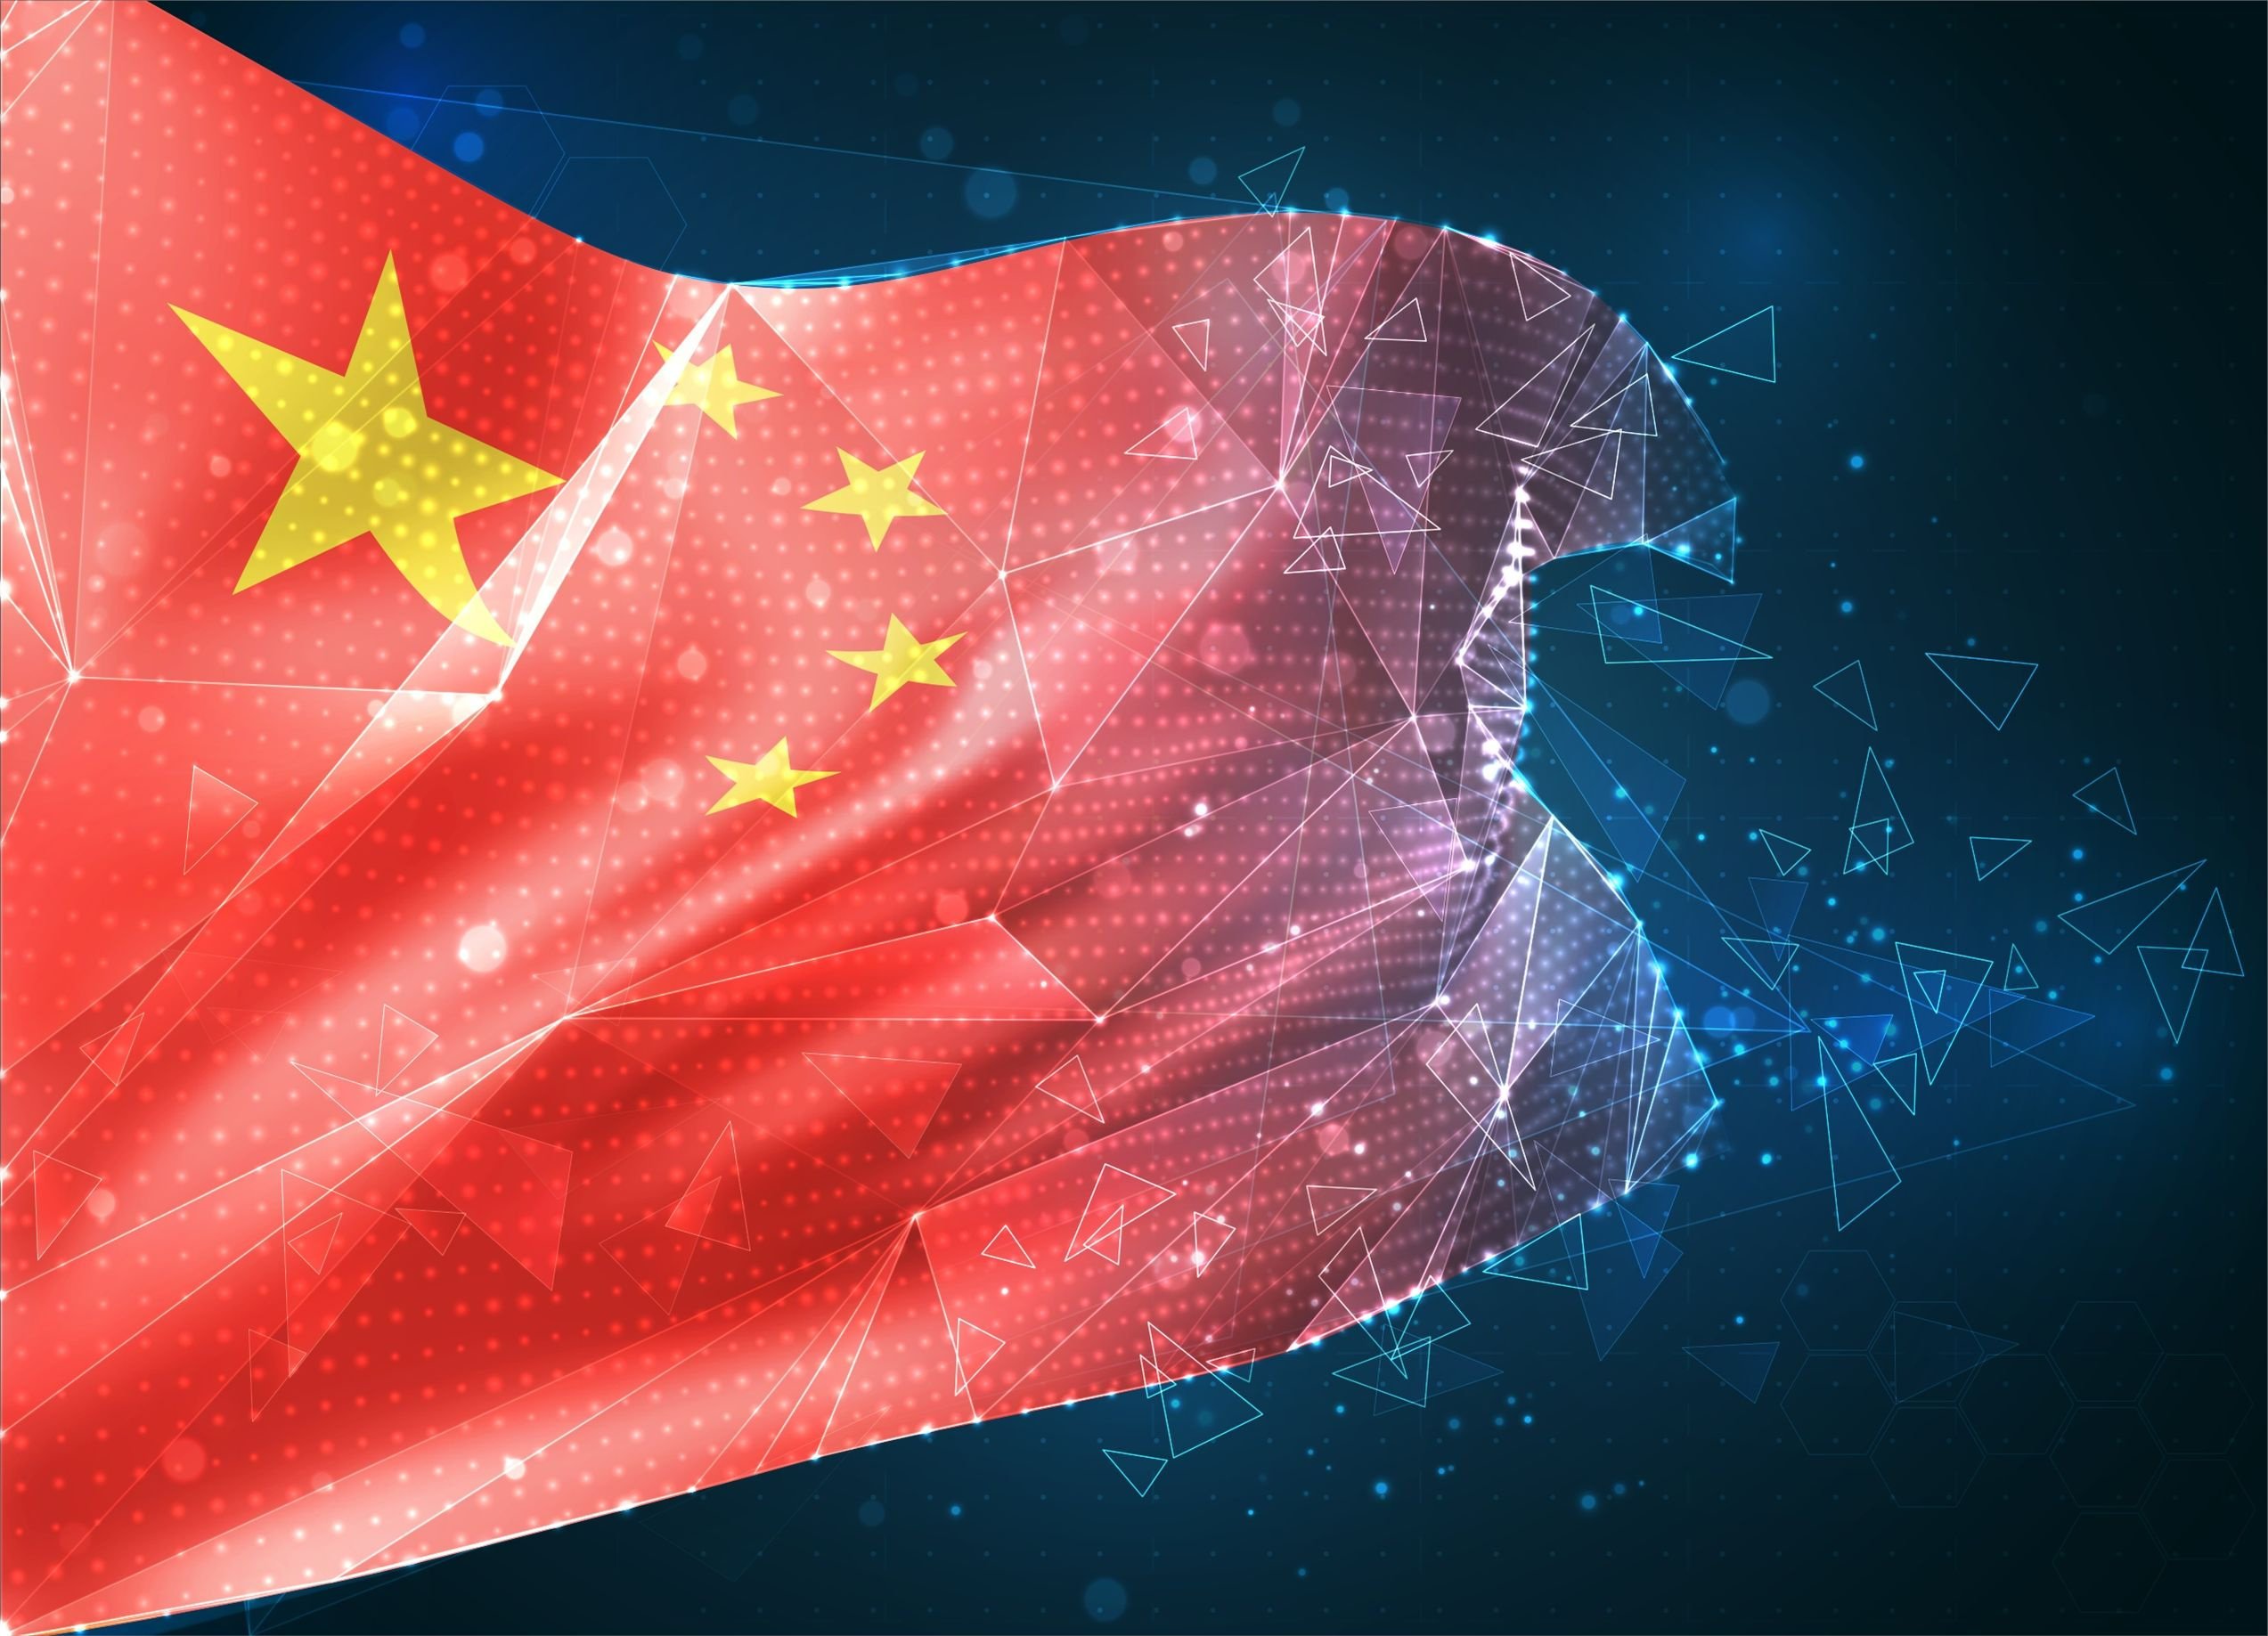 China’s leaders are looking to domestic internet platforms to help fuel economic growth in the country. Image: Shutterstock